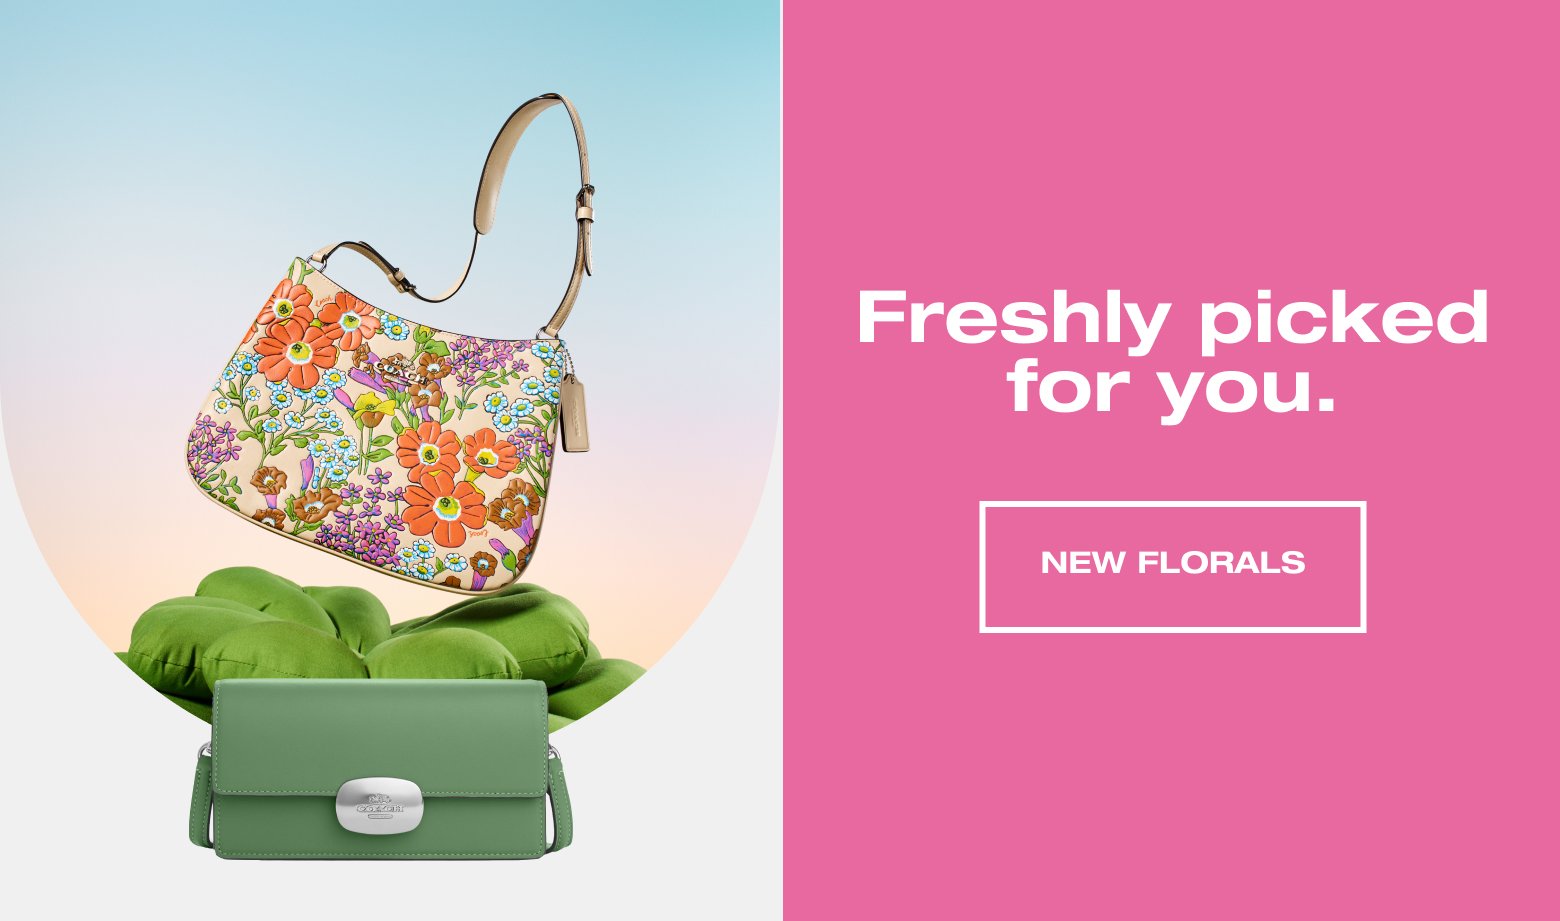 Freshly picked for you. NEW FLORALS